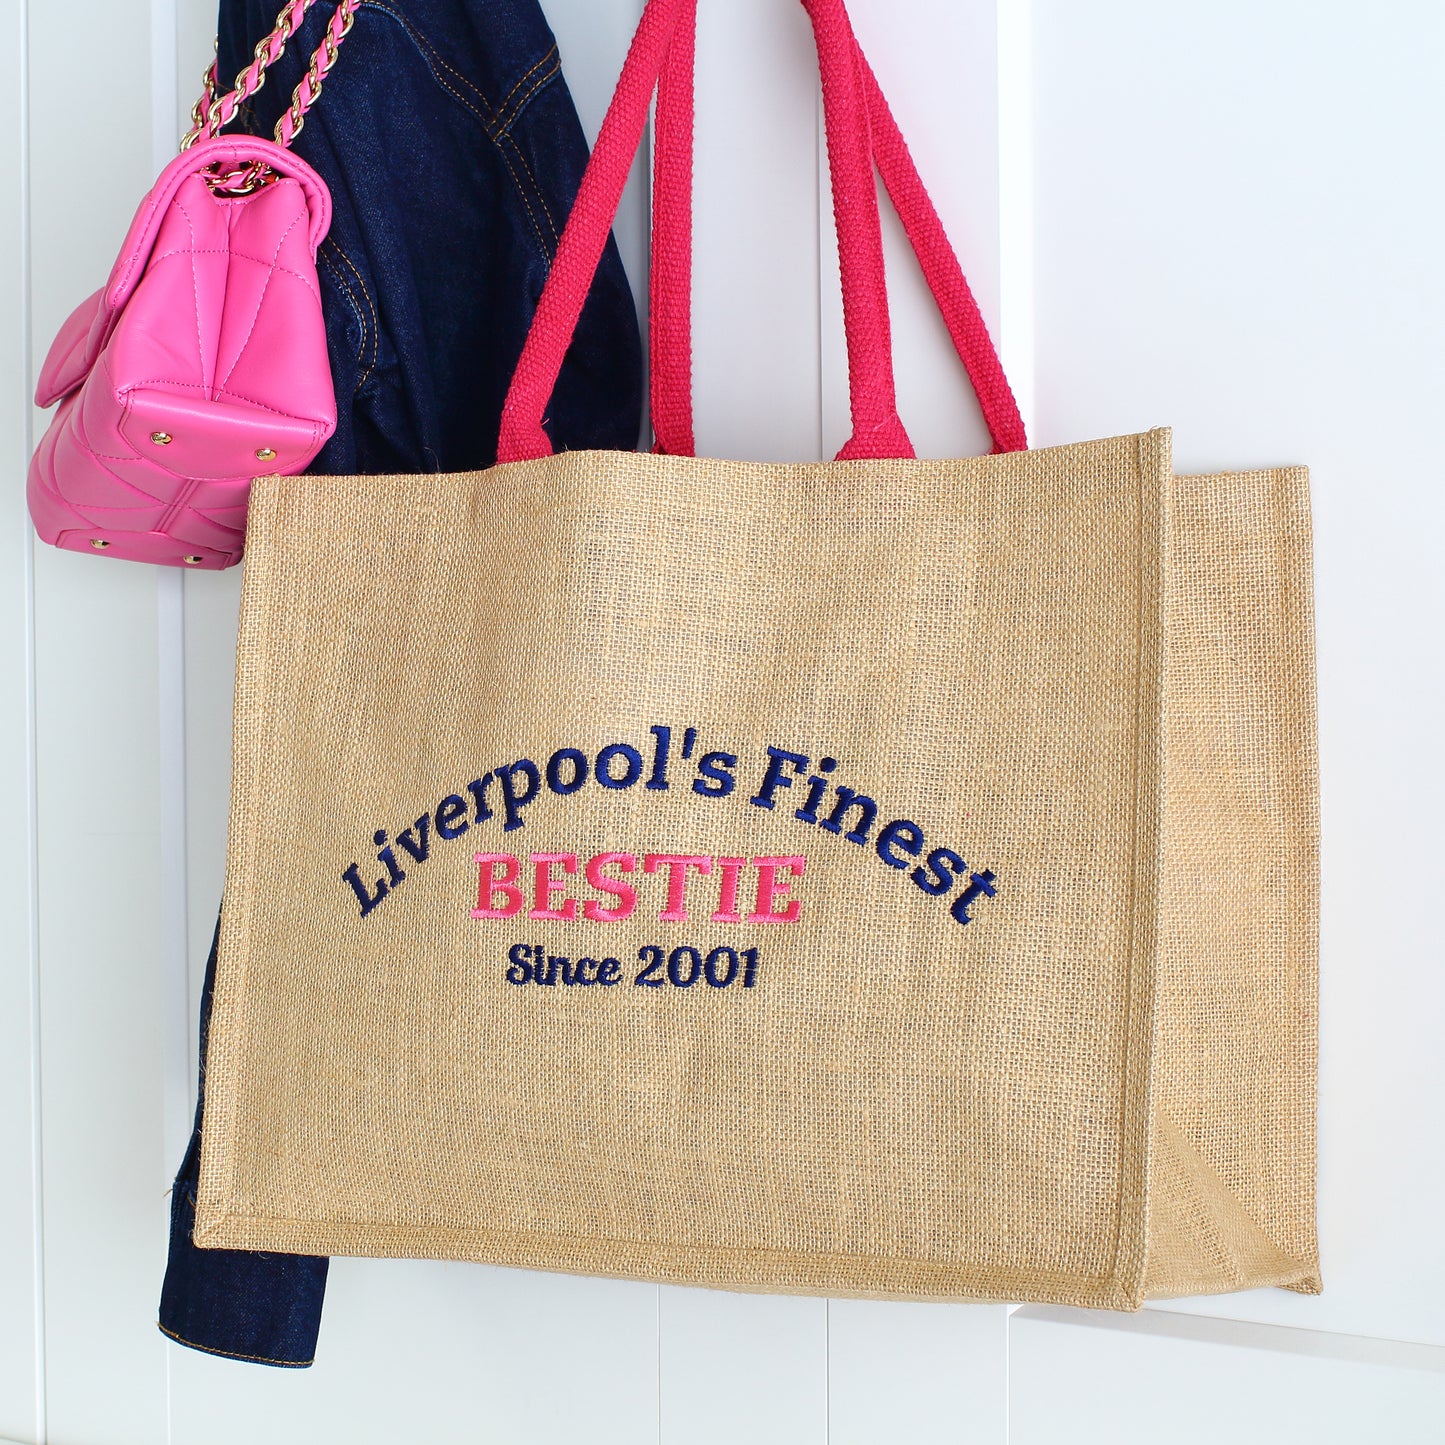 Embroidered Finest... Bestie Tote Bag